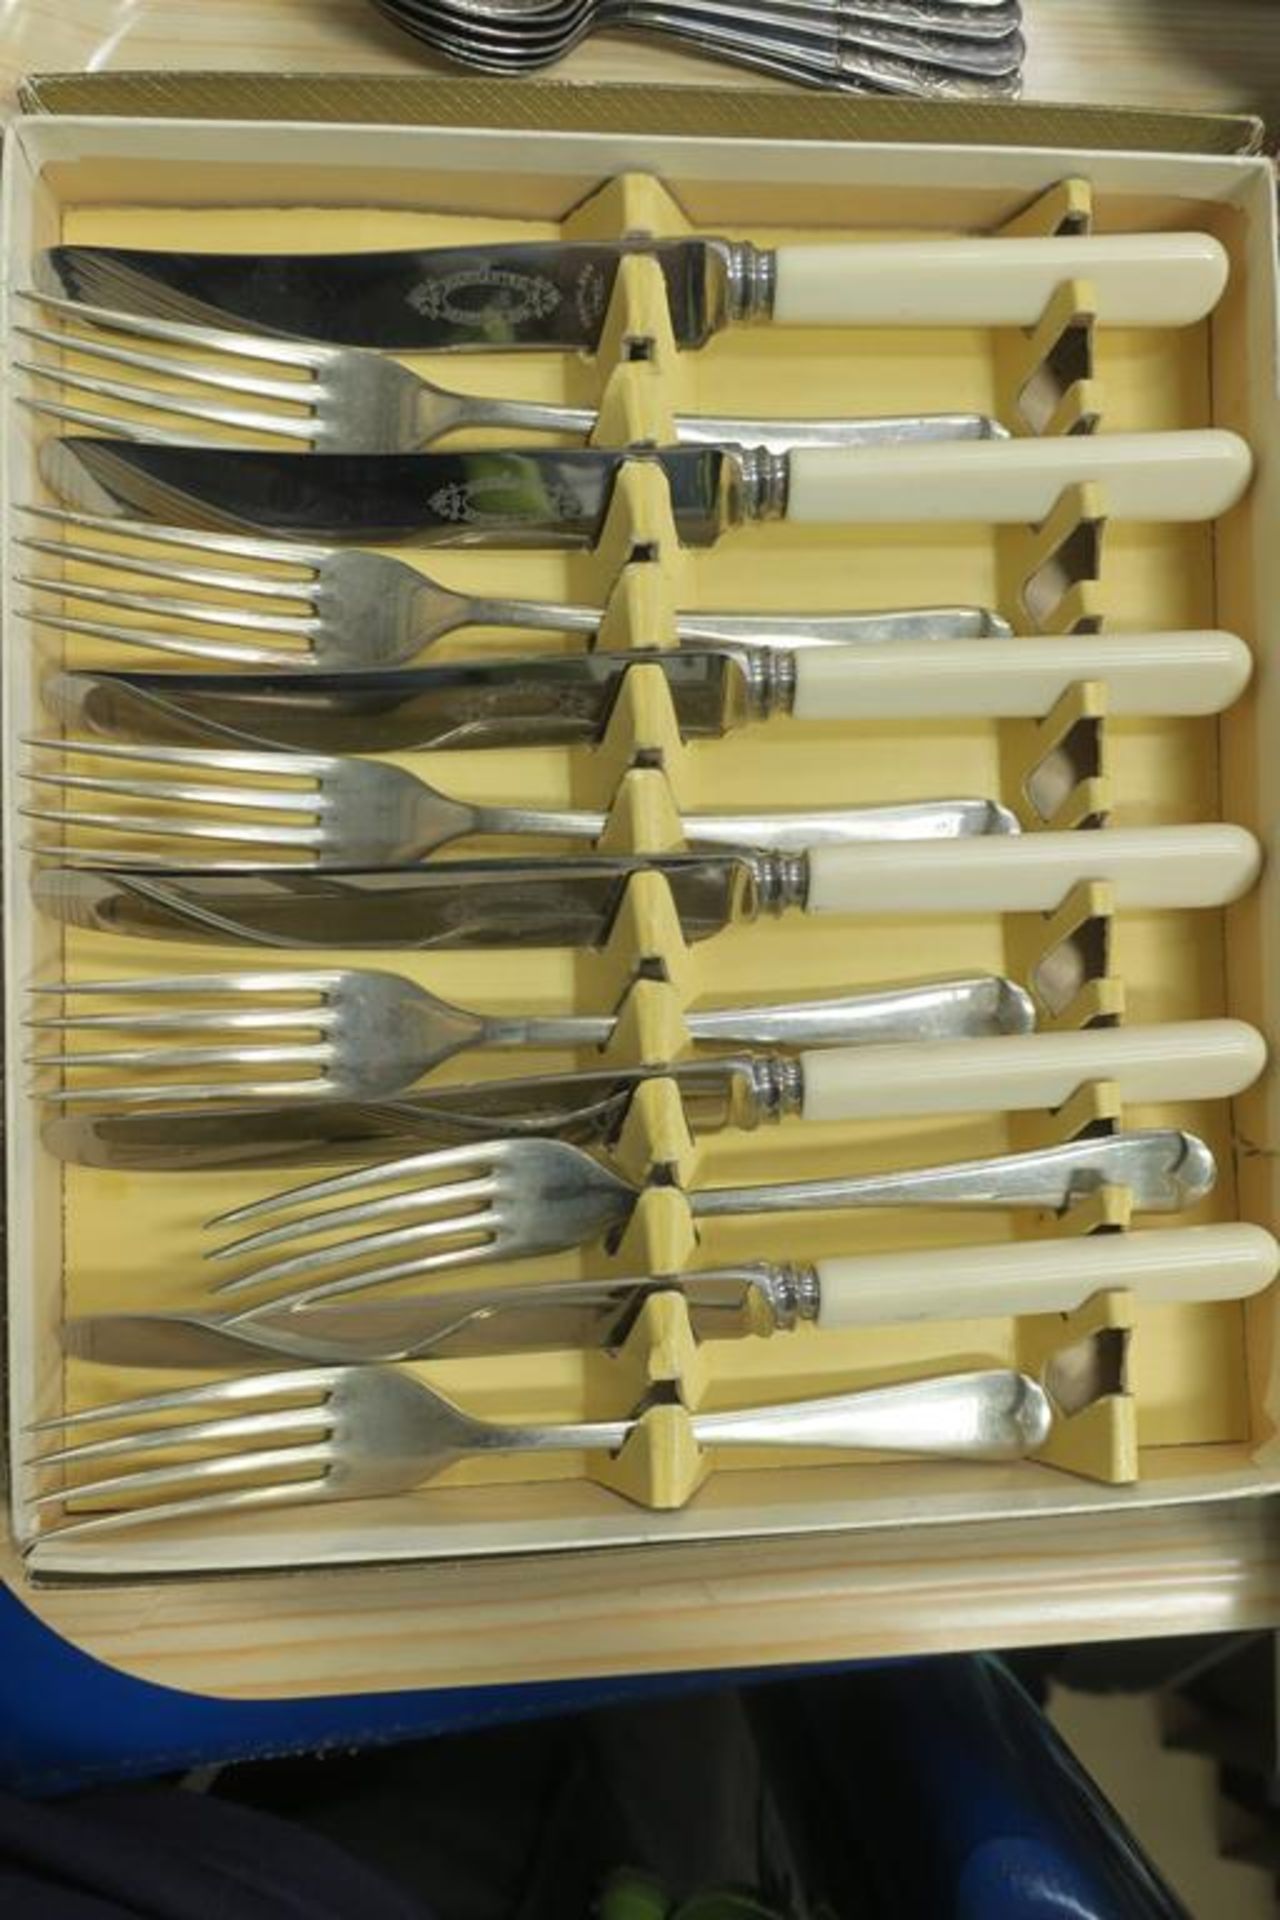 Two Boxed Sets of Knifes and Forks together with S - Image 2 of 5